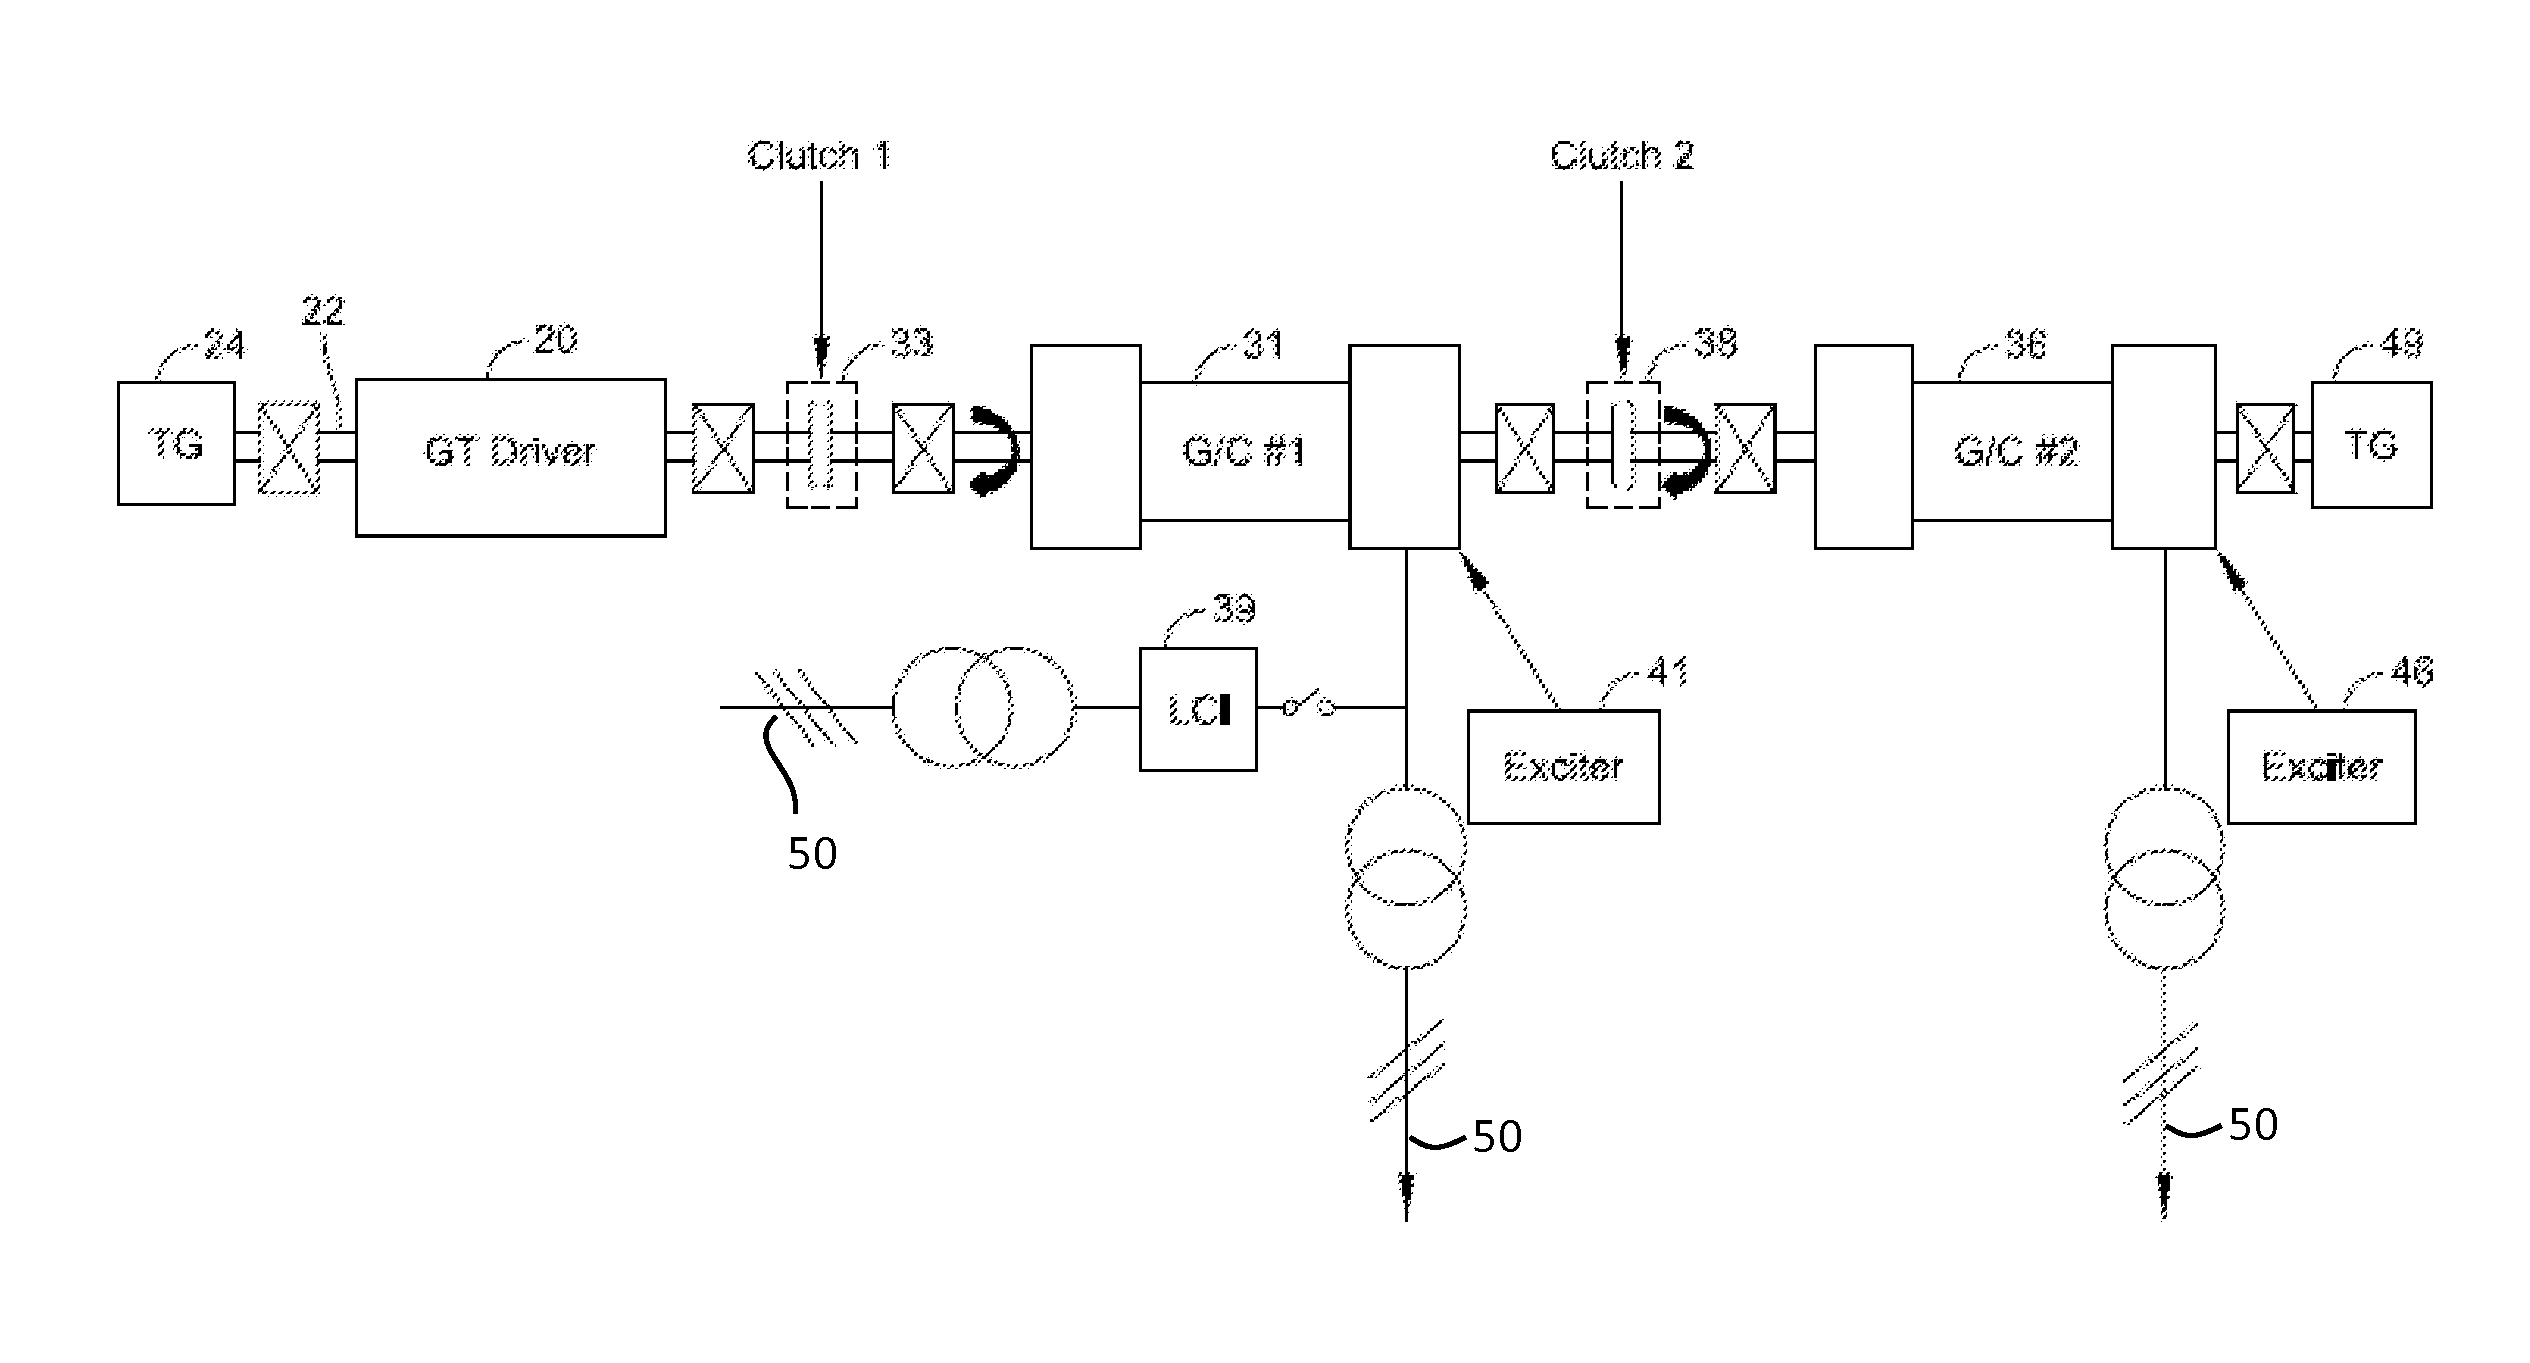 Prime mover generator system for simultaneous synchronous generator and condenser duties